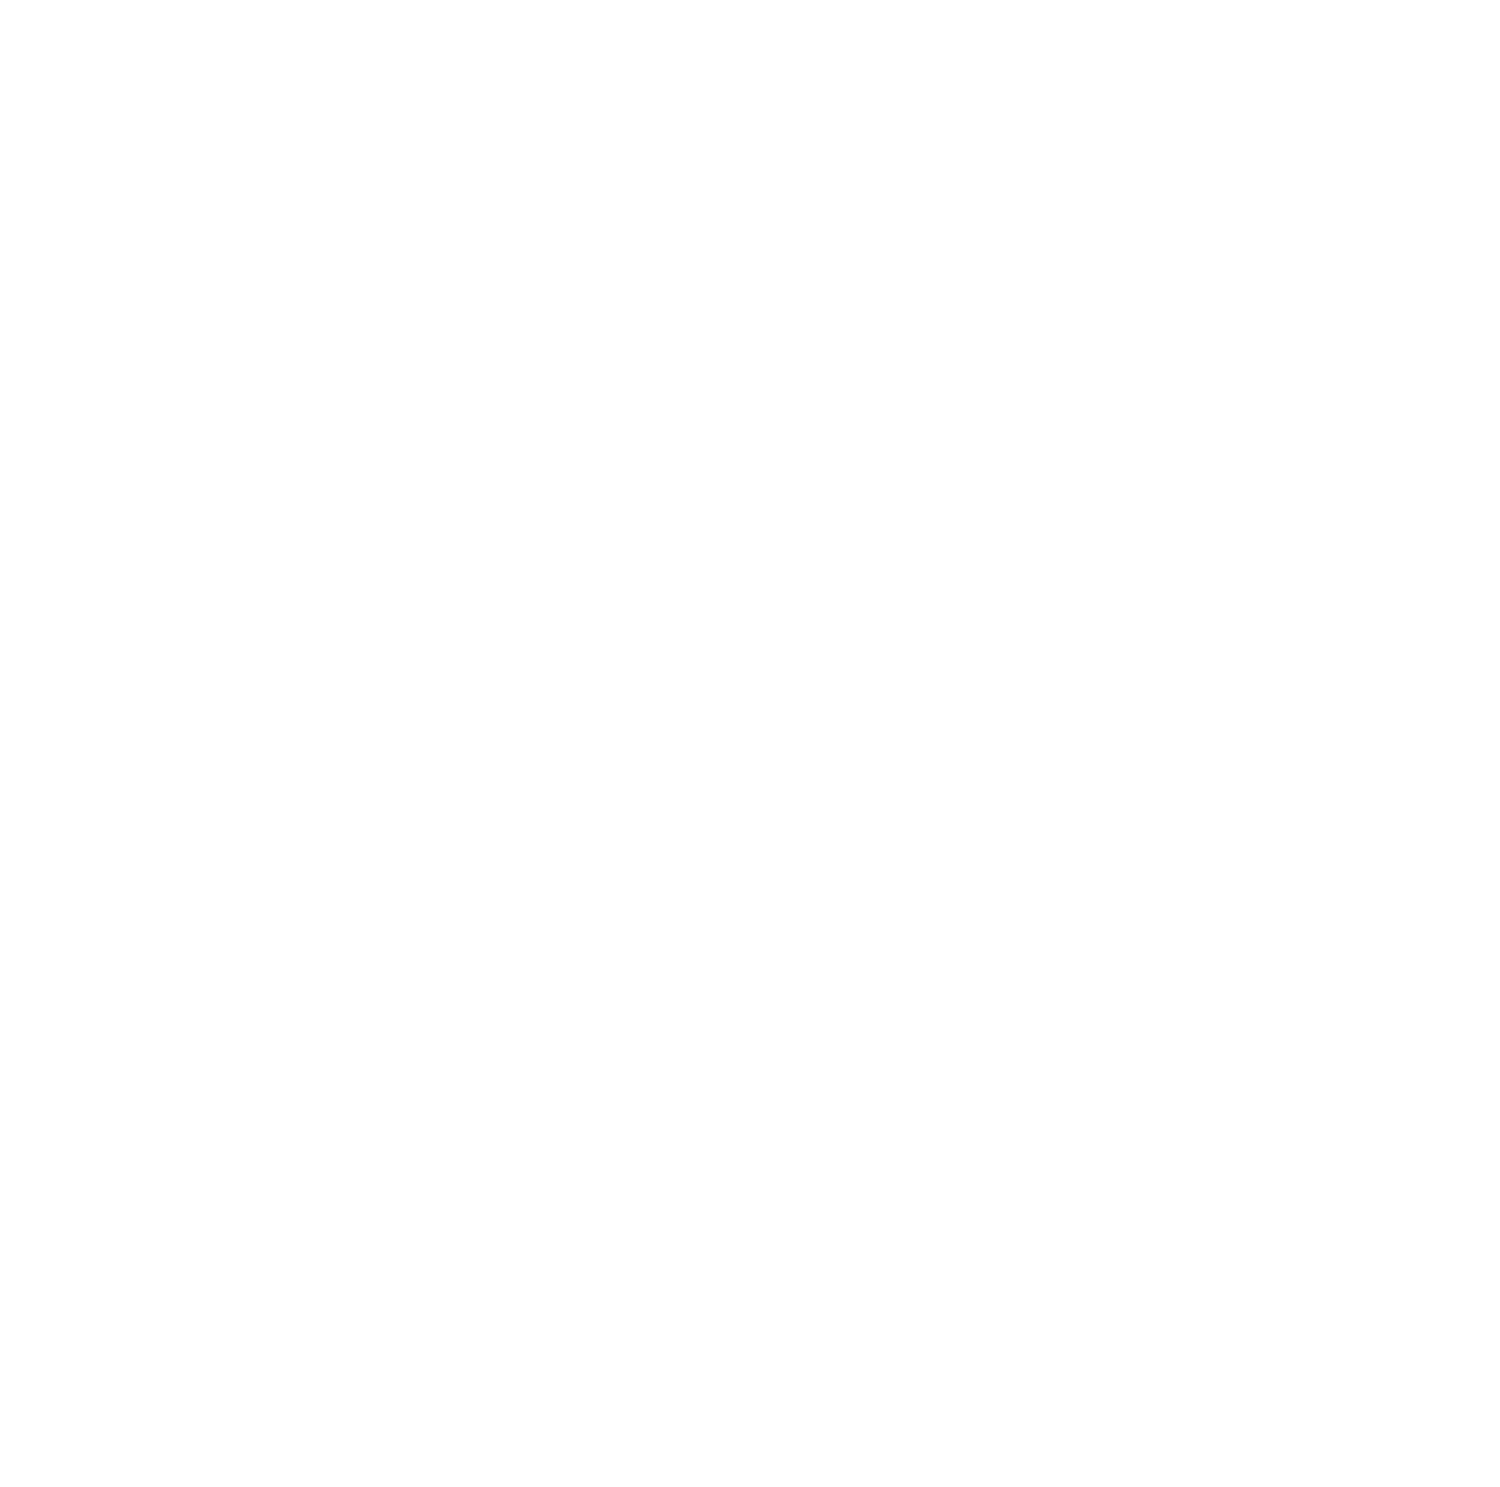 Waddesdon Wagyu - Eco Friendly and Full of Flavour